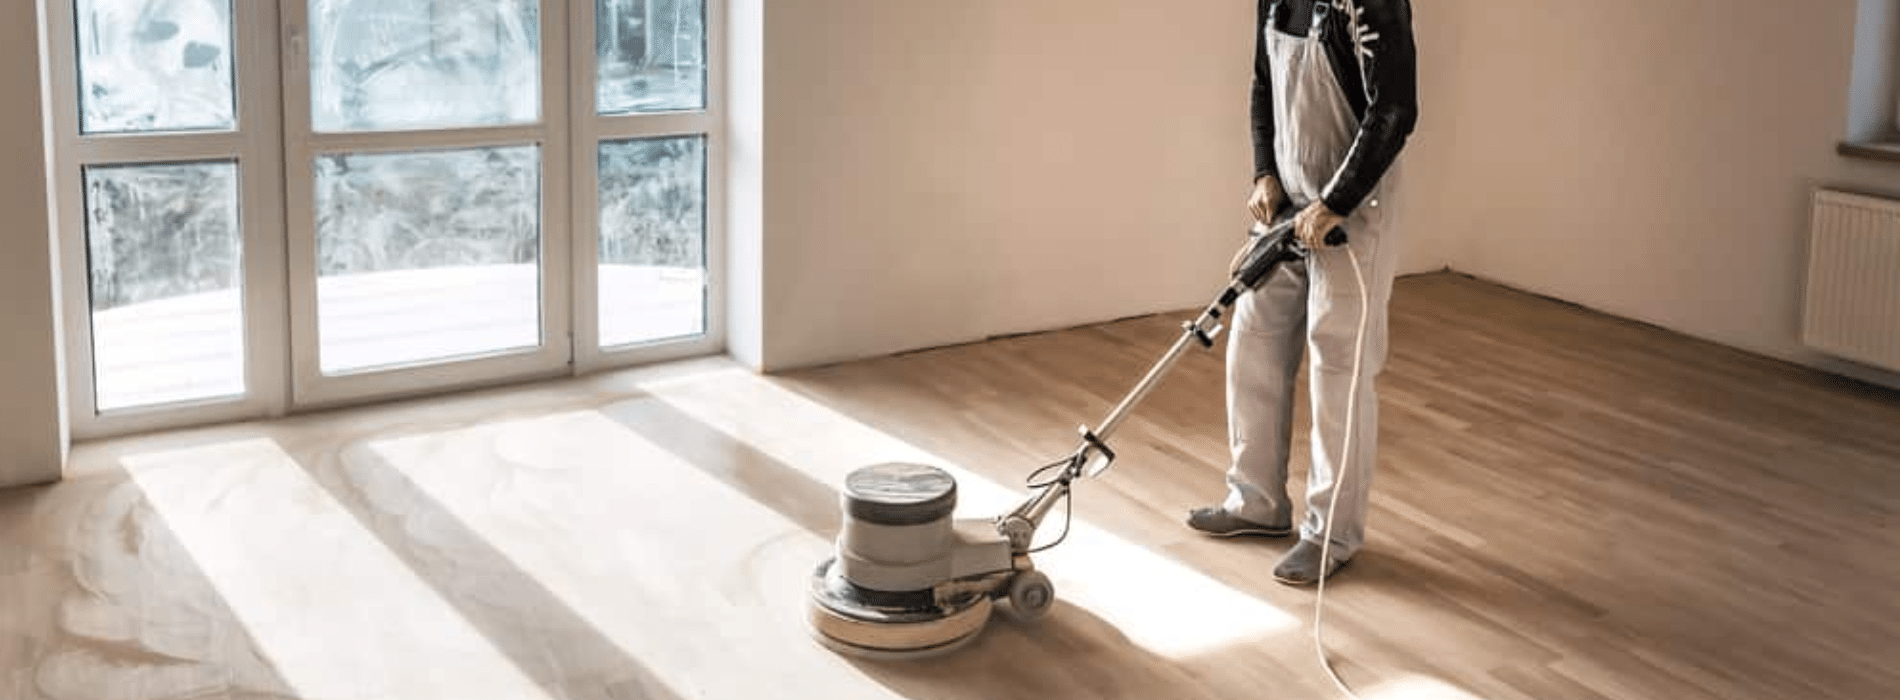 Mr Sander® skillfully sanding a herringbone floor using the powerful Effect 2200 Voltage 230 Frequency 50 Size 200x750 mm Bona belt sander. The dust extraction system with HEPA filter ensures a clean and efficient process. Witness the expertise of Mr Sander® in Greenwich, SE10.